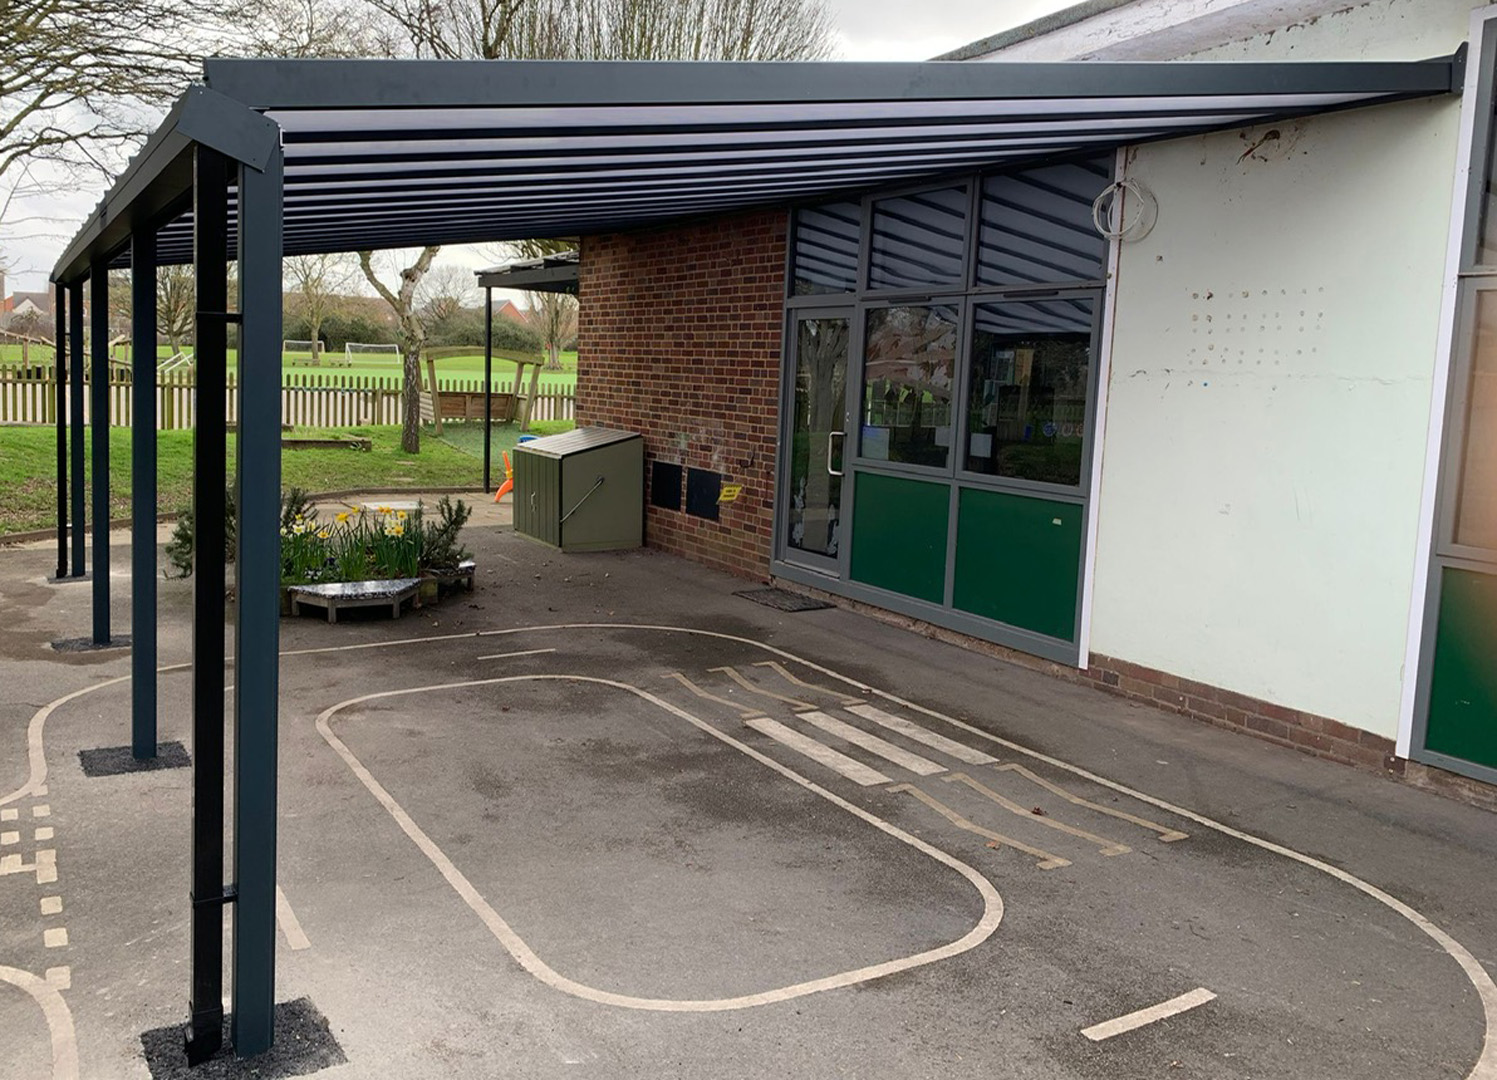 Delightful commercial canopy installation at primary school in Leamington Spa, installed by our Trade Partner Cambridge Canopies